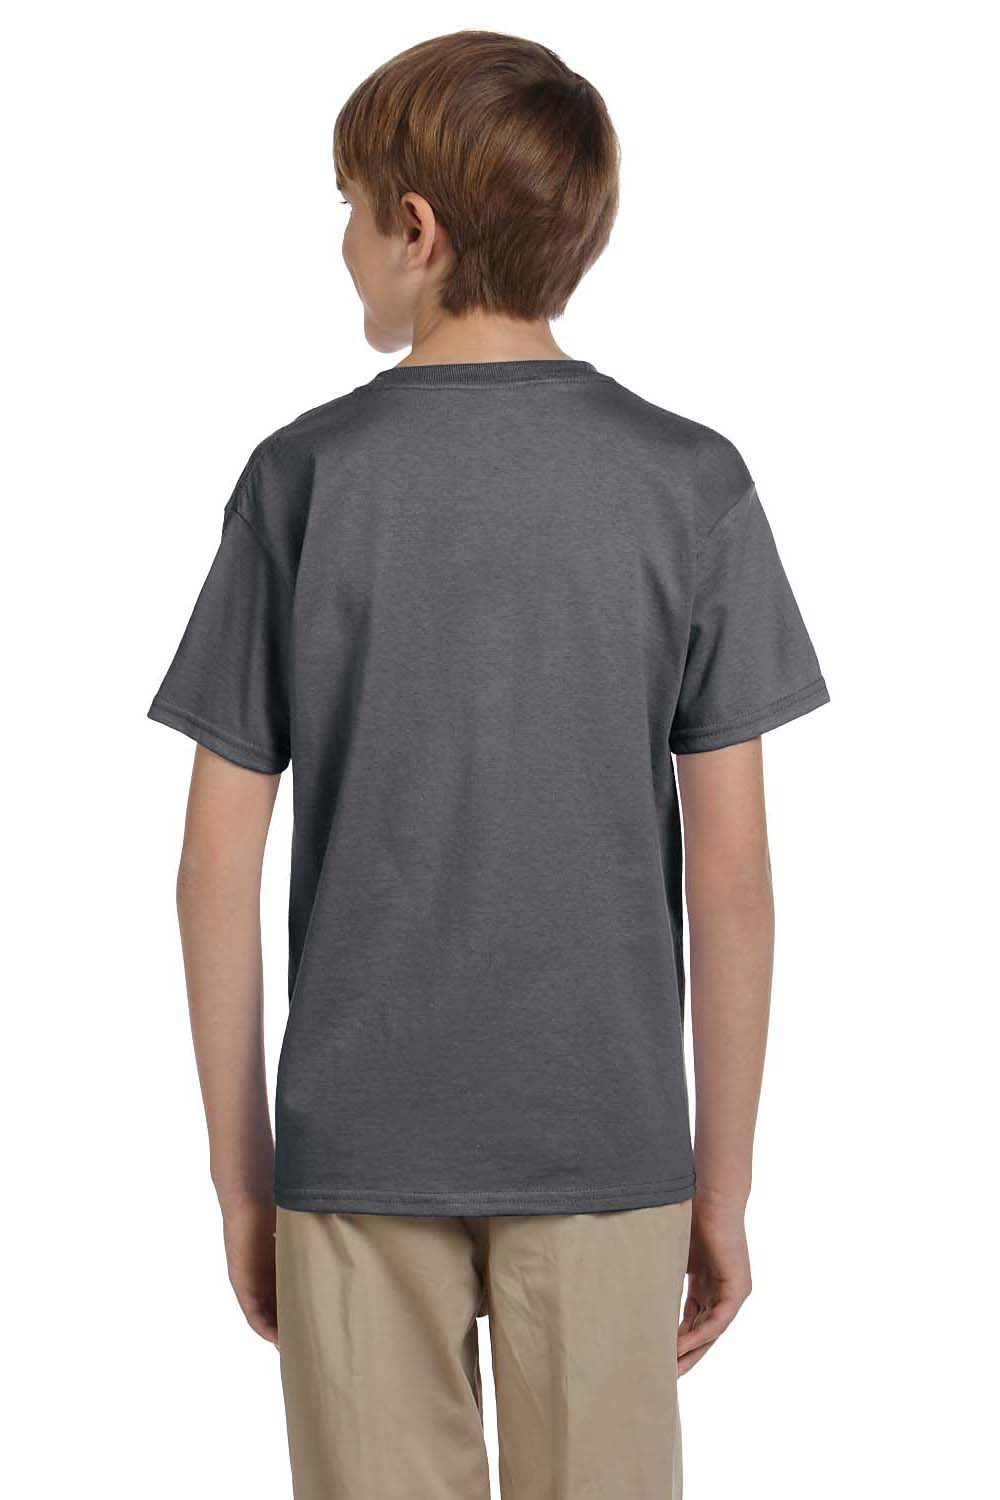 Fruit Of The Loom 3931B Youth HD Jersey Short Sleeve Crewneck T-Shirt Charcoal Grey Back